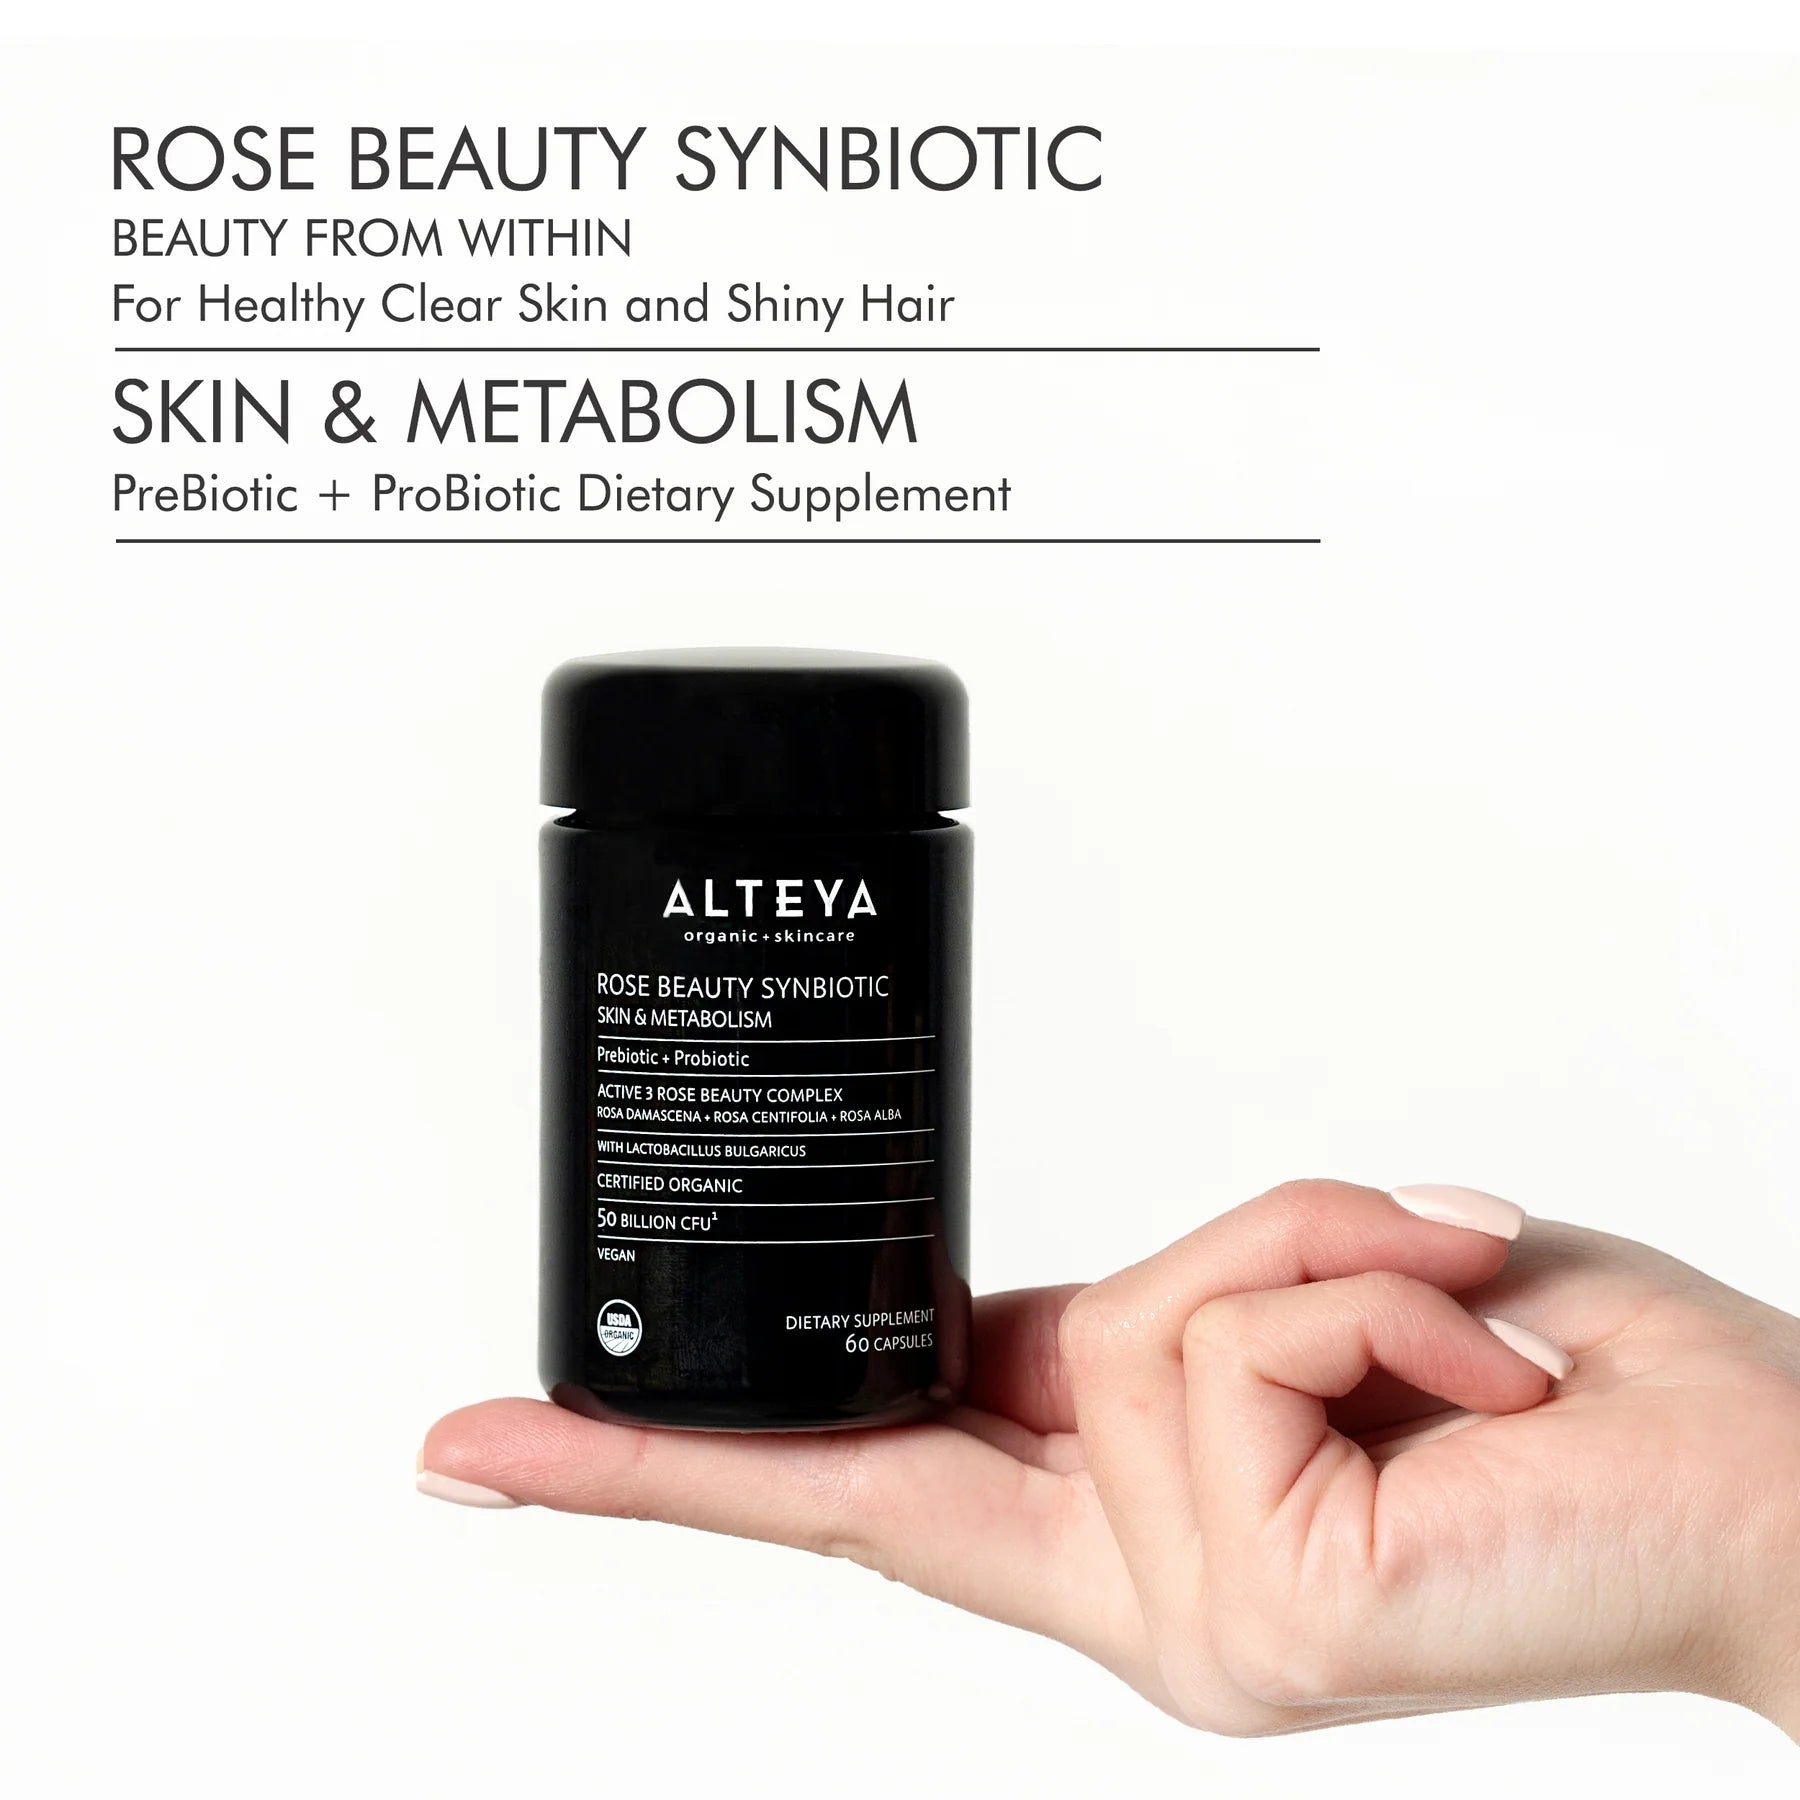 A hand holding an Rose Beauty Prebiotic and Probiotic - Synbiotic Skin &amp; Metabolism Vegan Organic Supplement, promoting gut health and enhancing skin appearance.